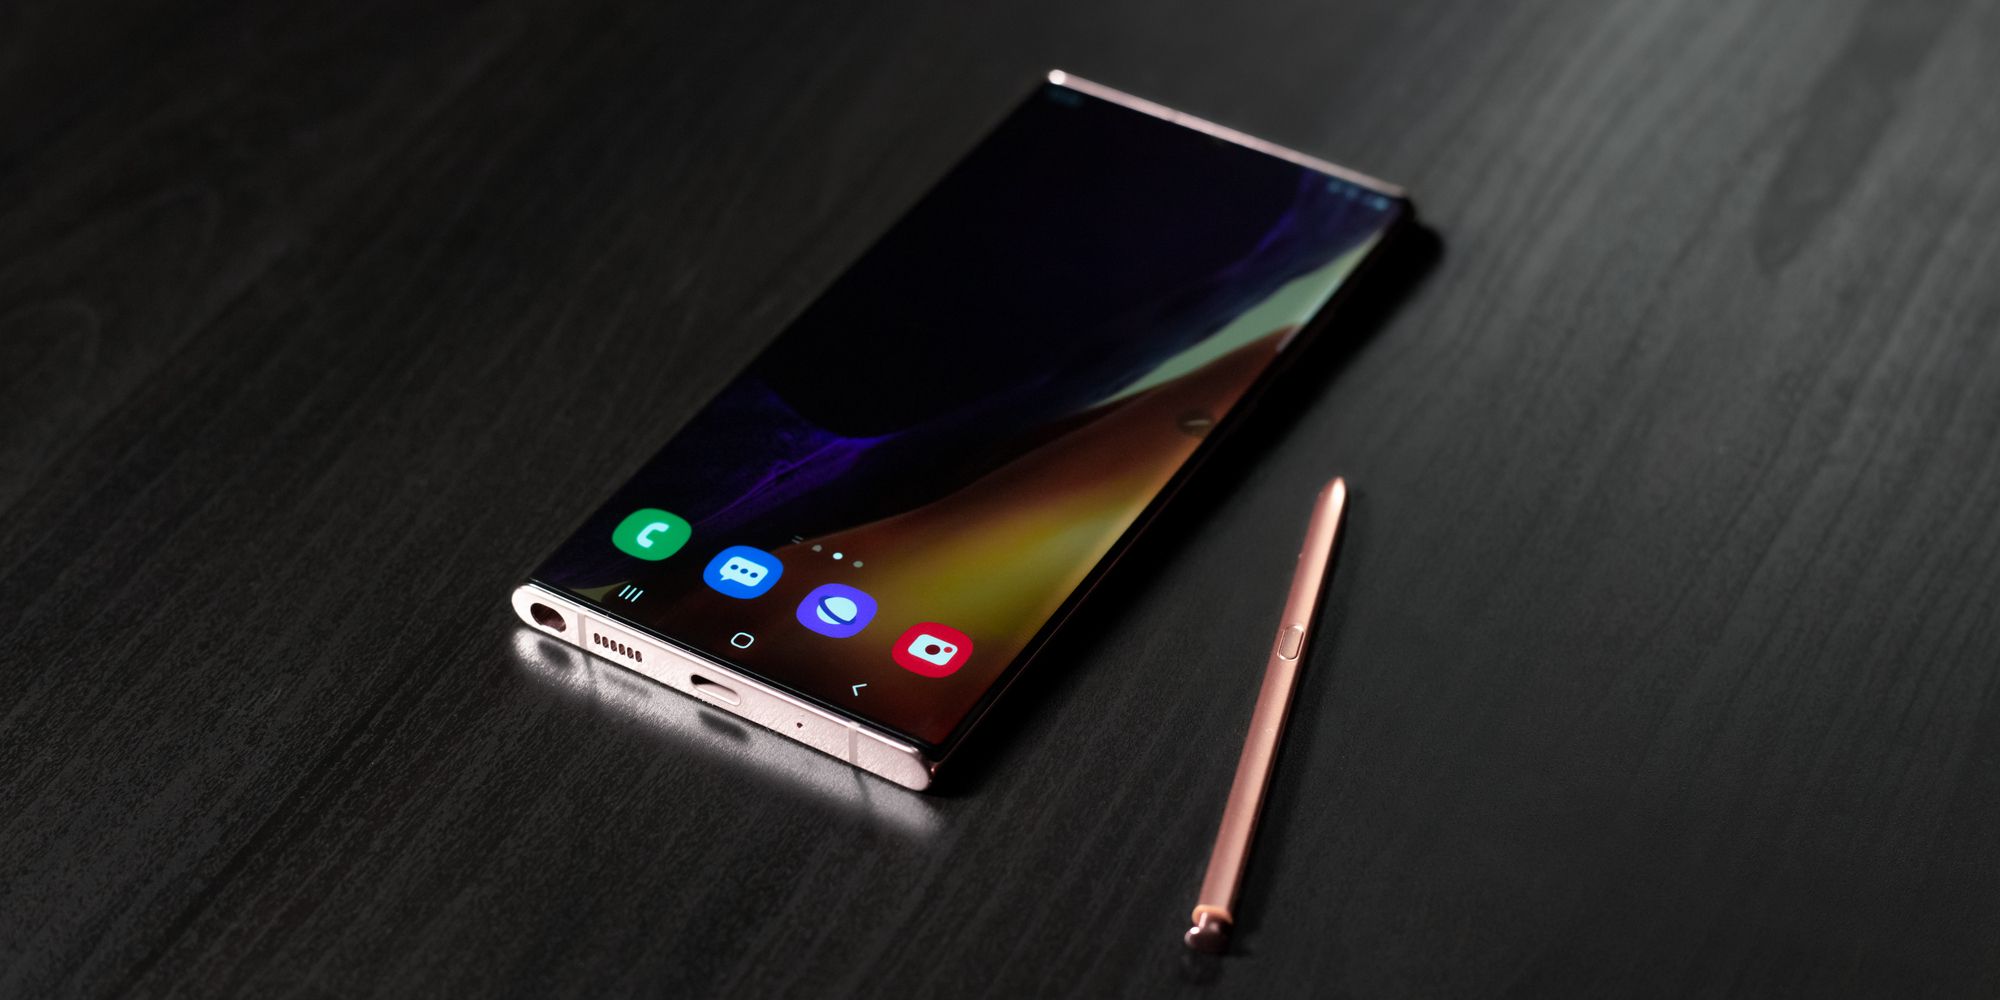 Farewell Galaxy Note Samsung Reportedly Ends Production For Good